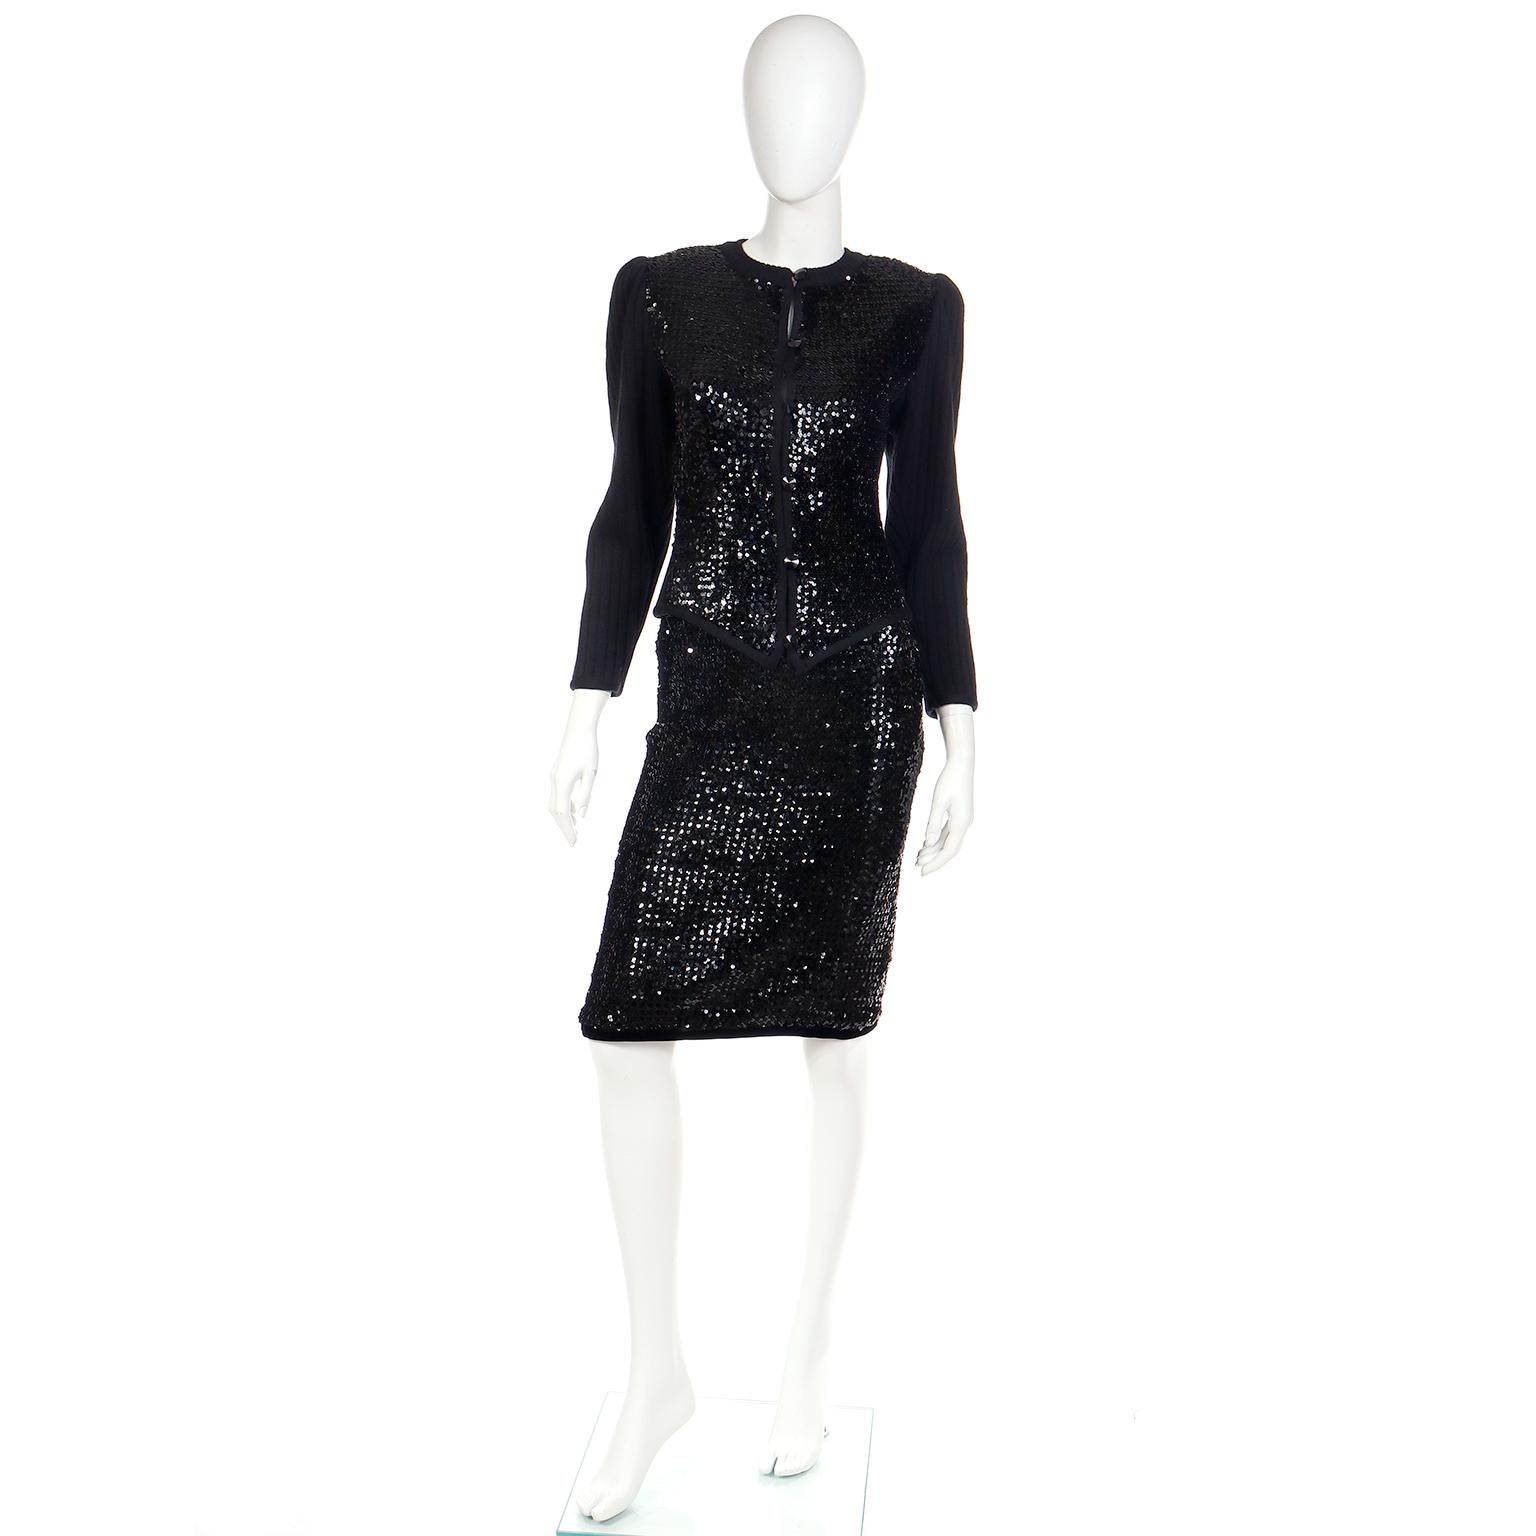 This is a really versatile 1980's Yves Saint Laurent vintage knit skirt suit with shimmering black sequins. This evening dress alternative set includes a button front knit sequin sweater with a sequin covered skirt.

The cardigan crew neck sweater